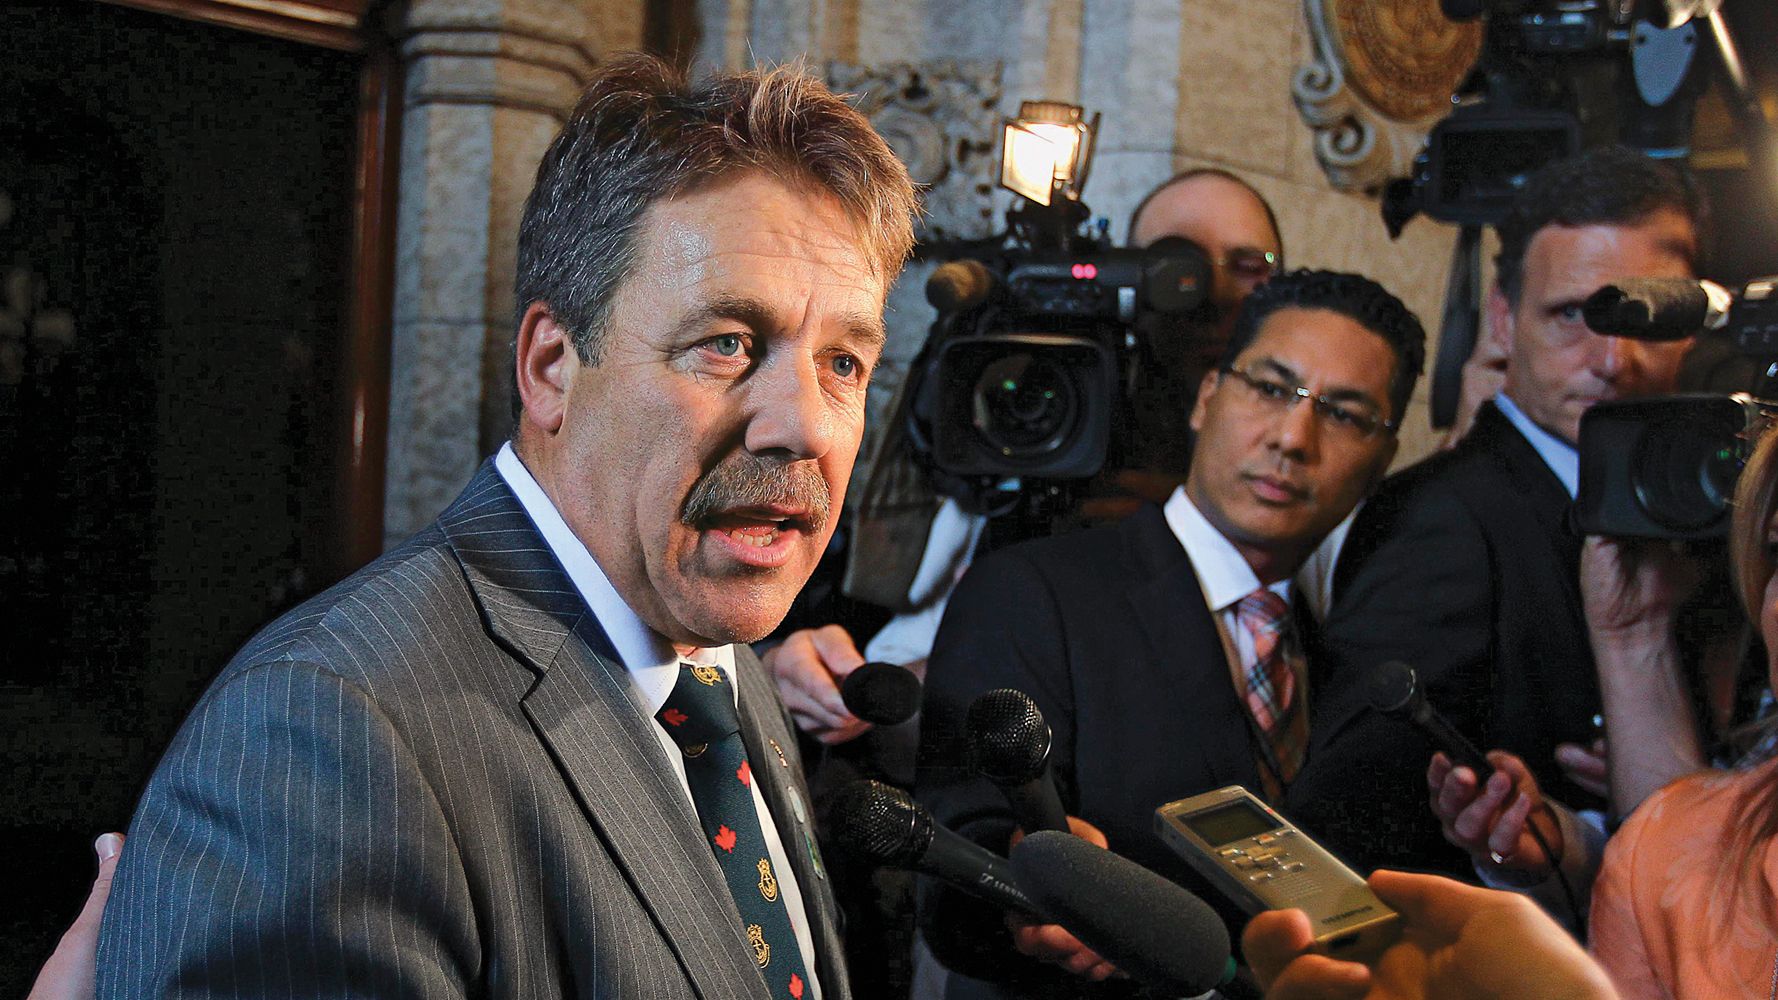 NDP MP Peter Stoffer